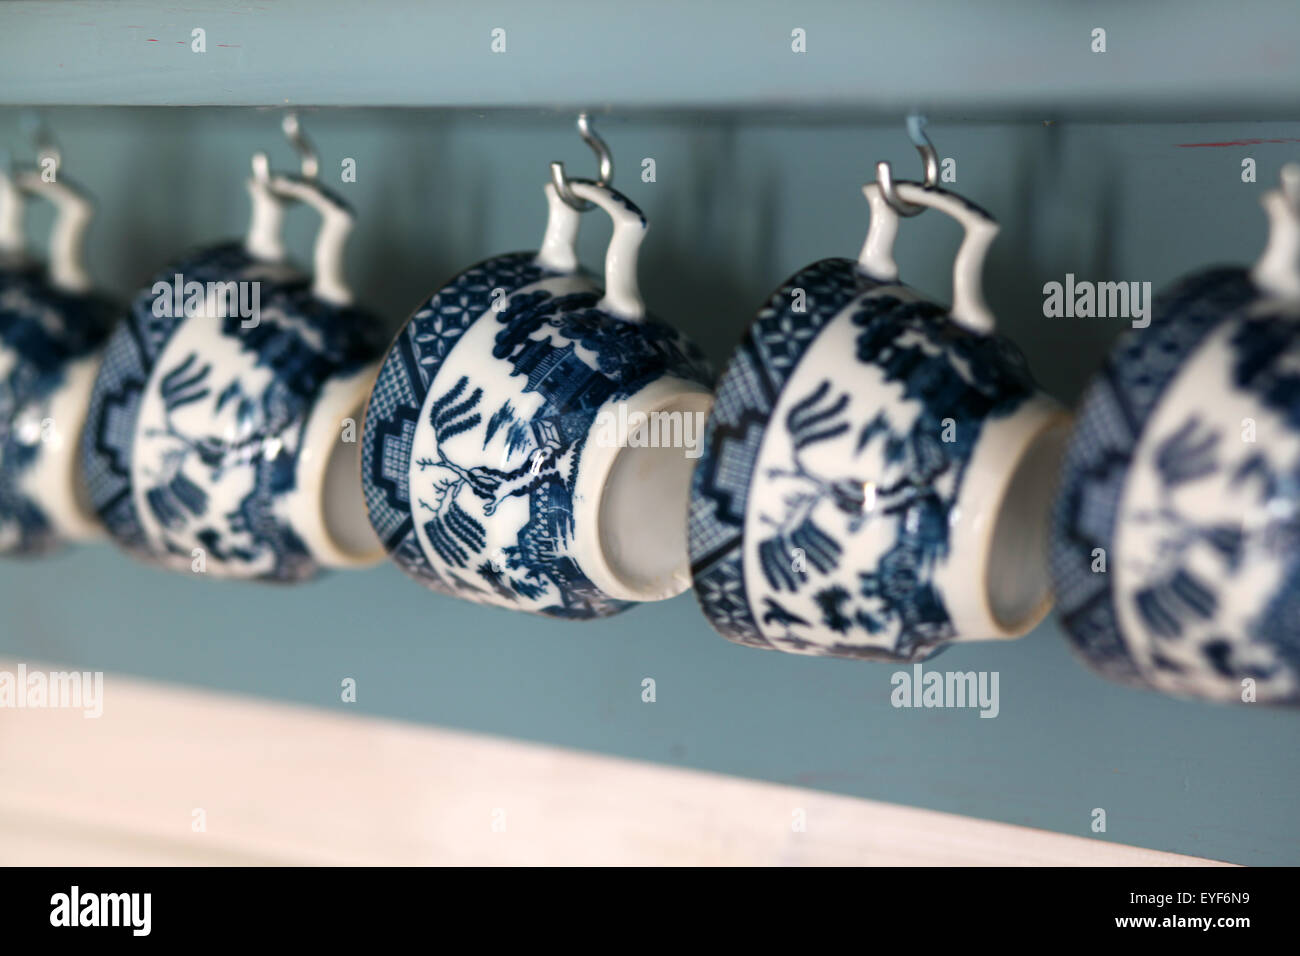 Old fashioned coffee cups hanging from lihgt blue shelf Stock Photo